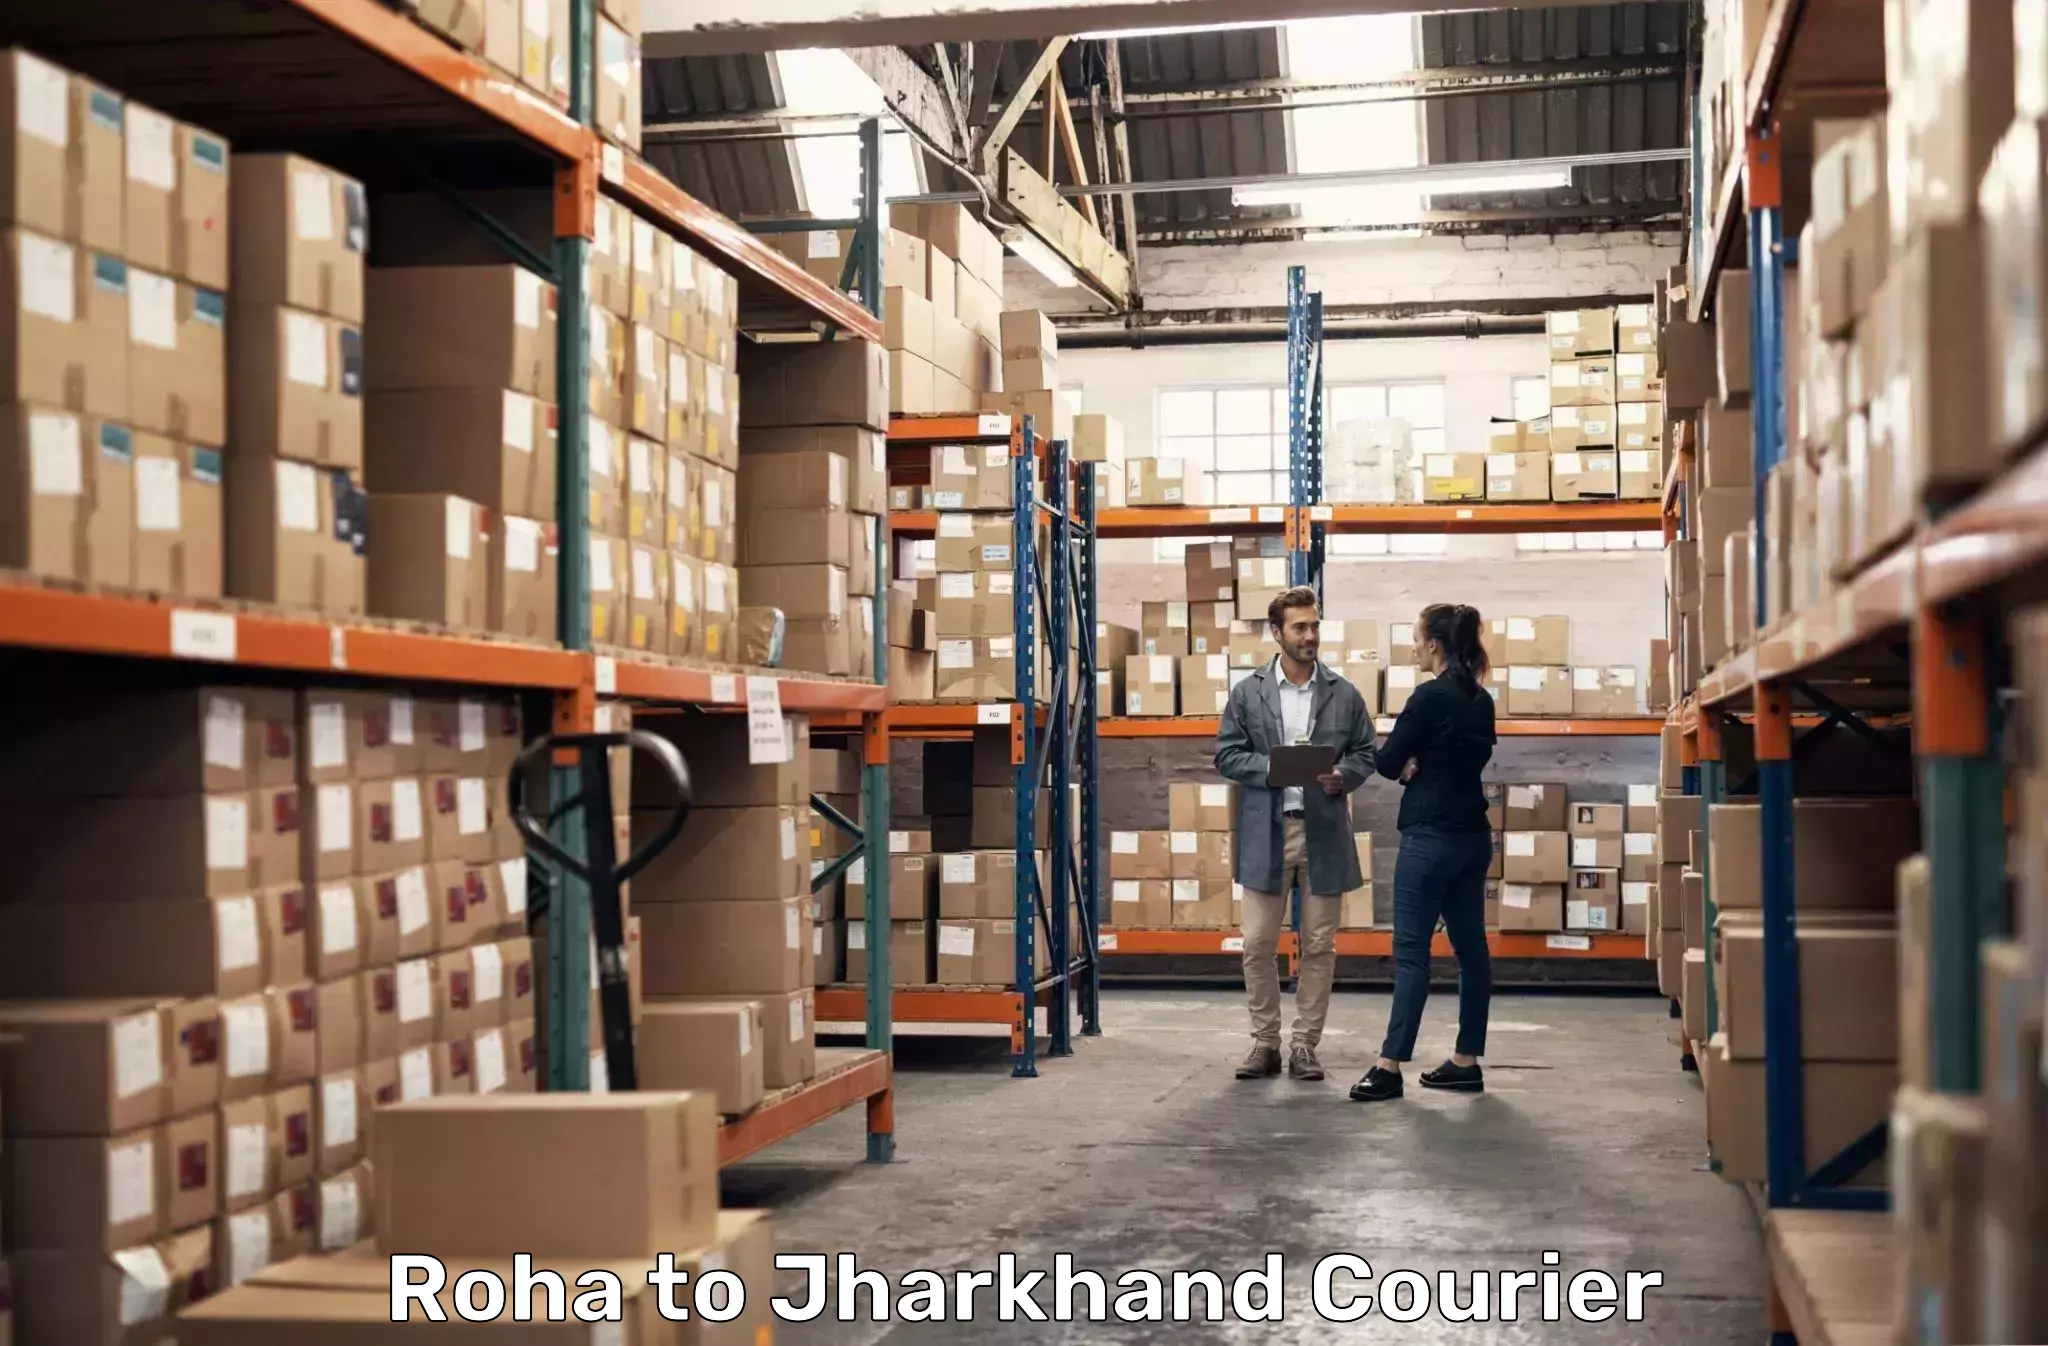 Courier service comparison in Roha to Jamshedpur